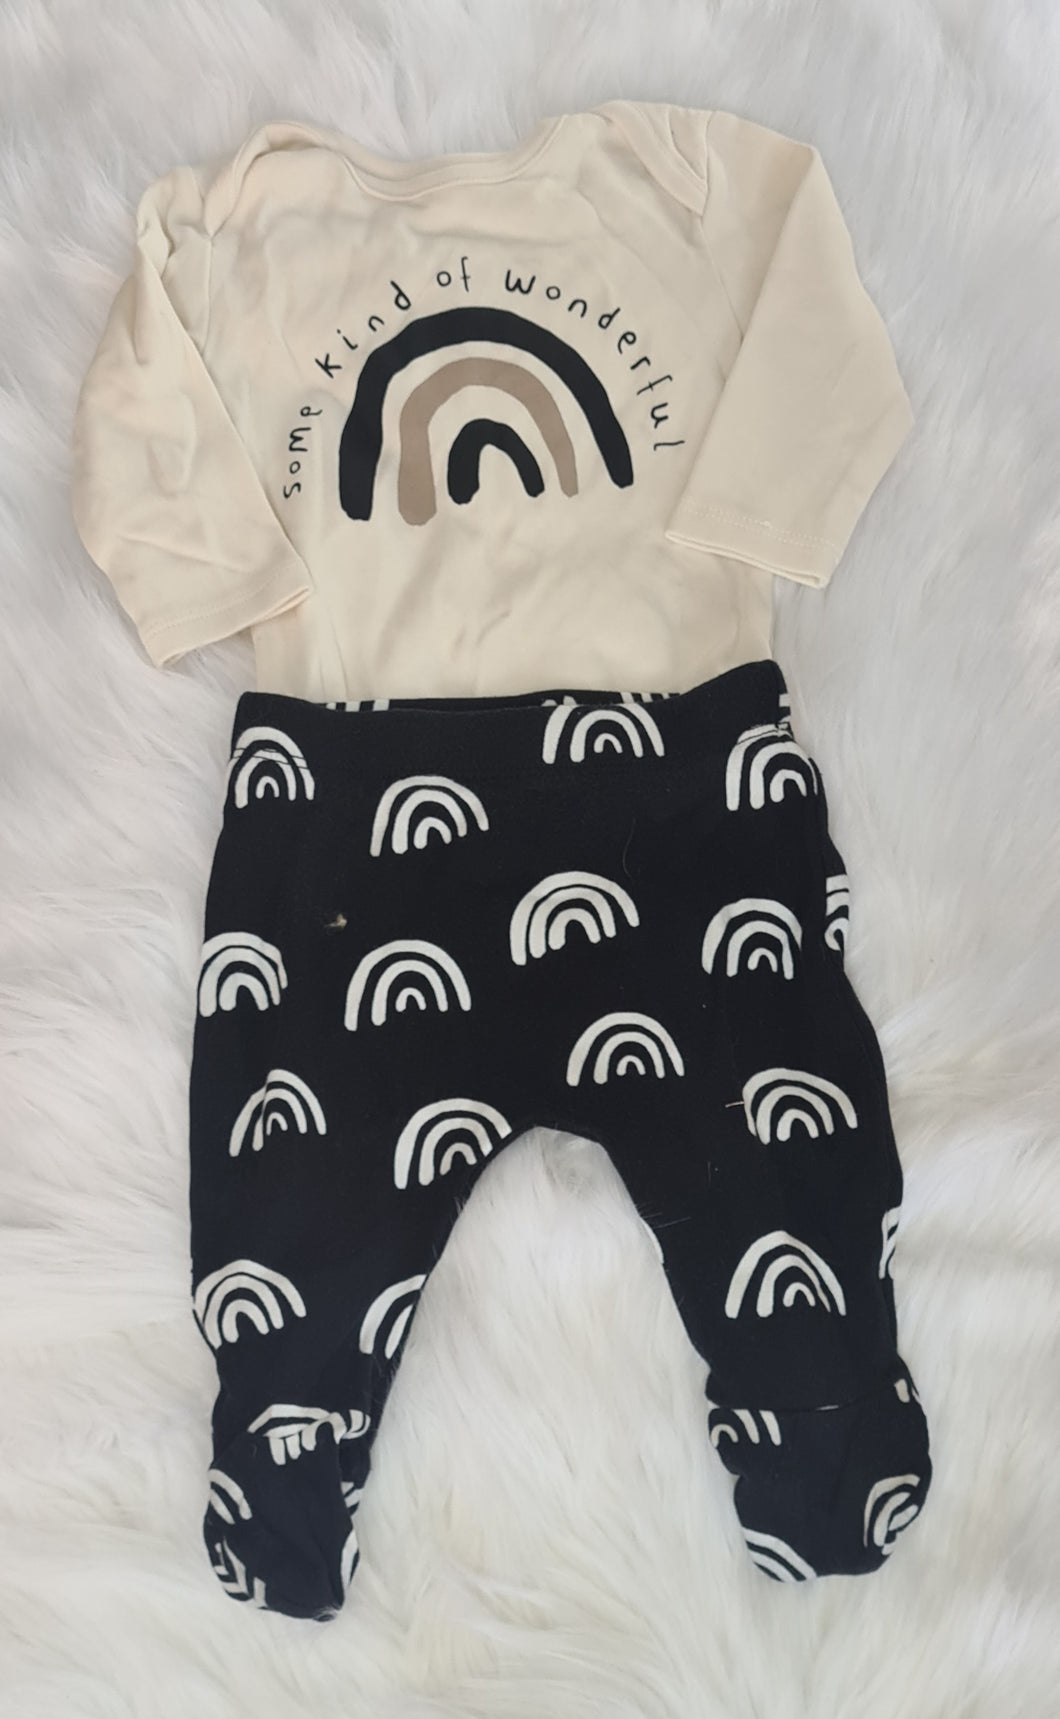 Boys 0-3 months - Rainbow Print Black and White Top and Joggers Set